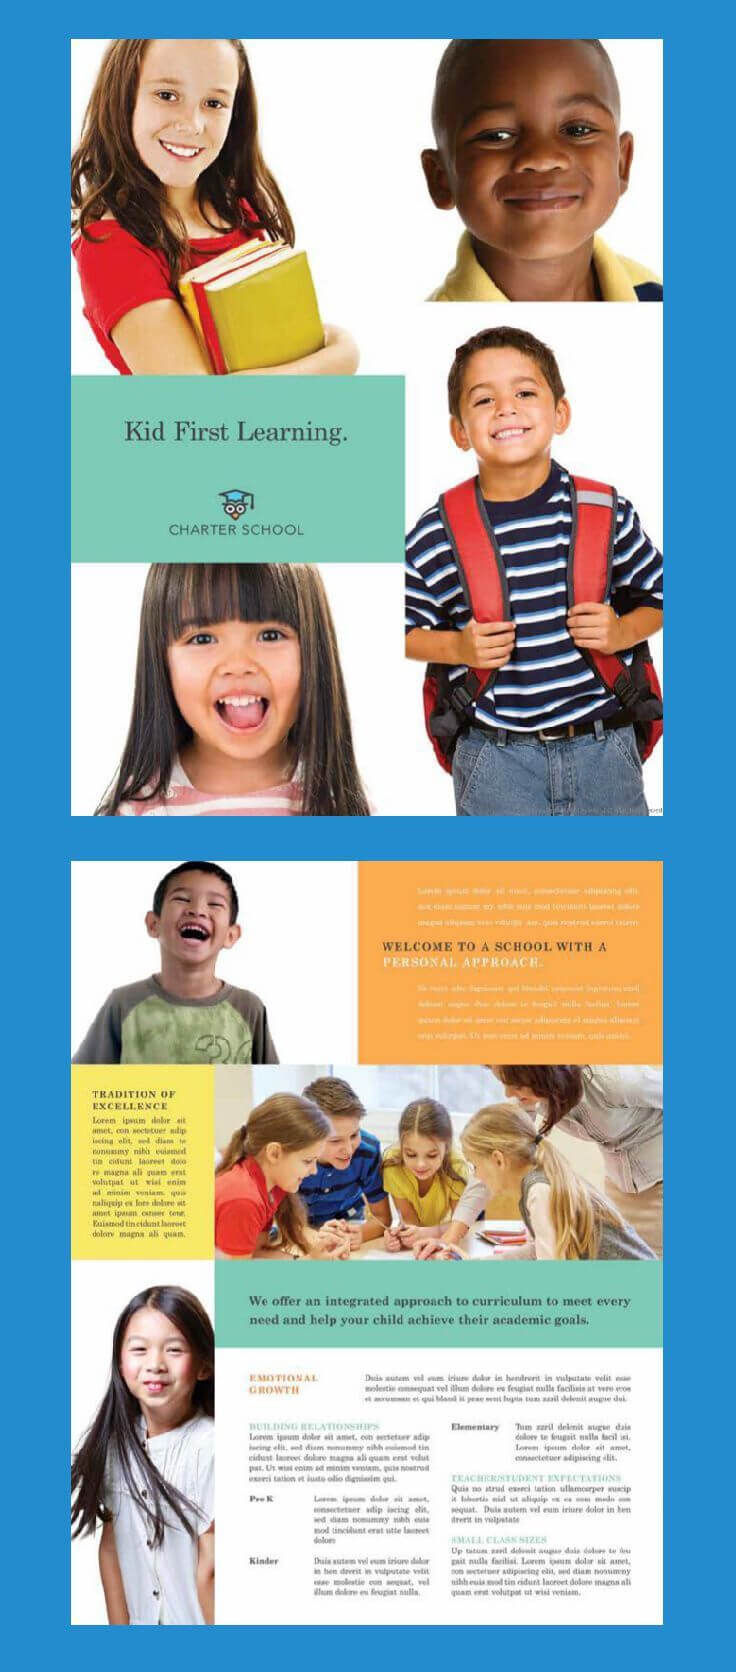 Brochure Design Template For A Primary School Or Charter Pertaining To School Brochure Design Templates